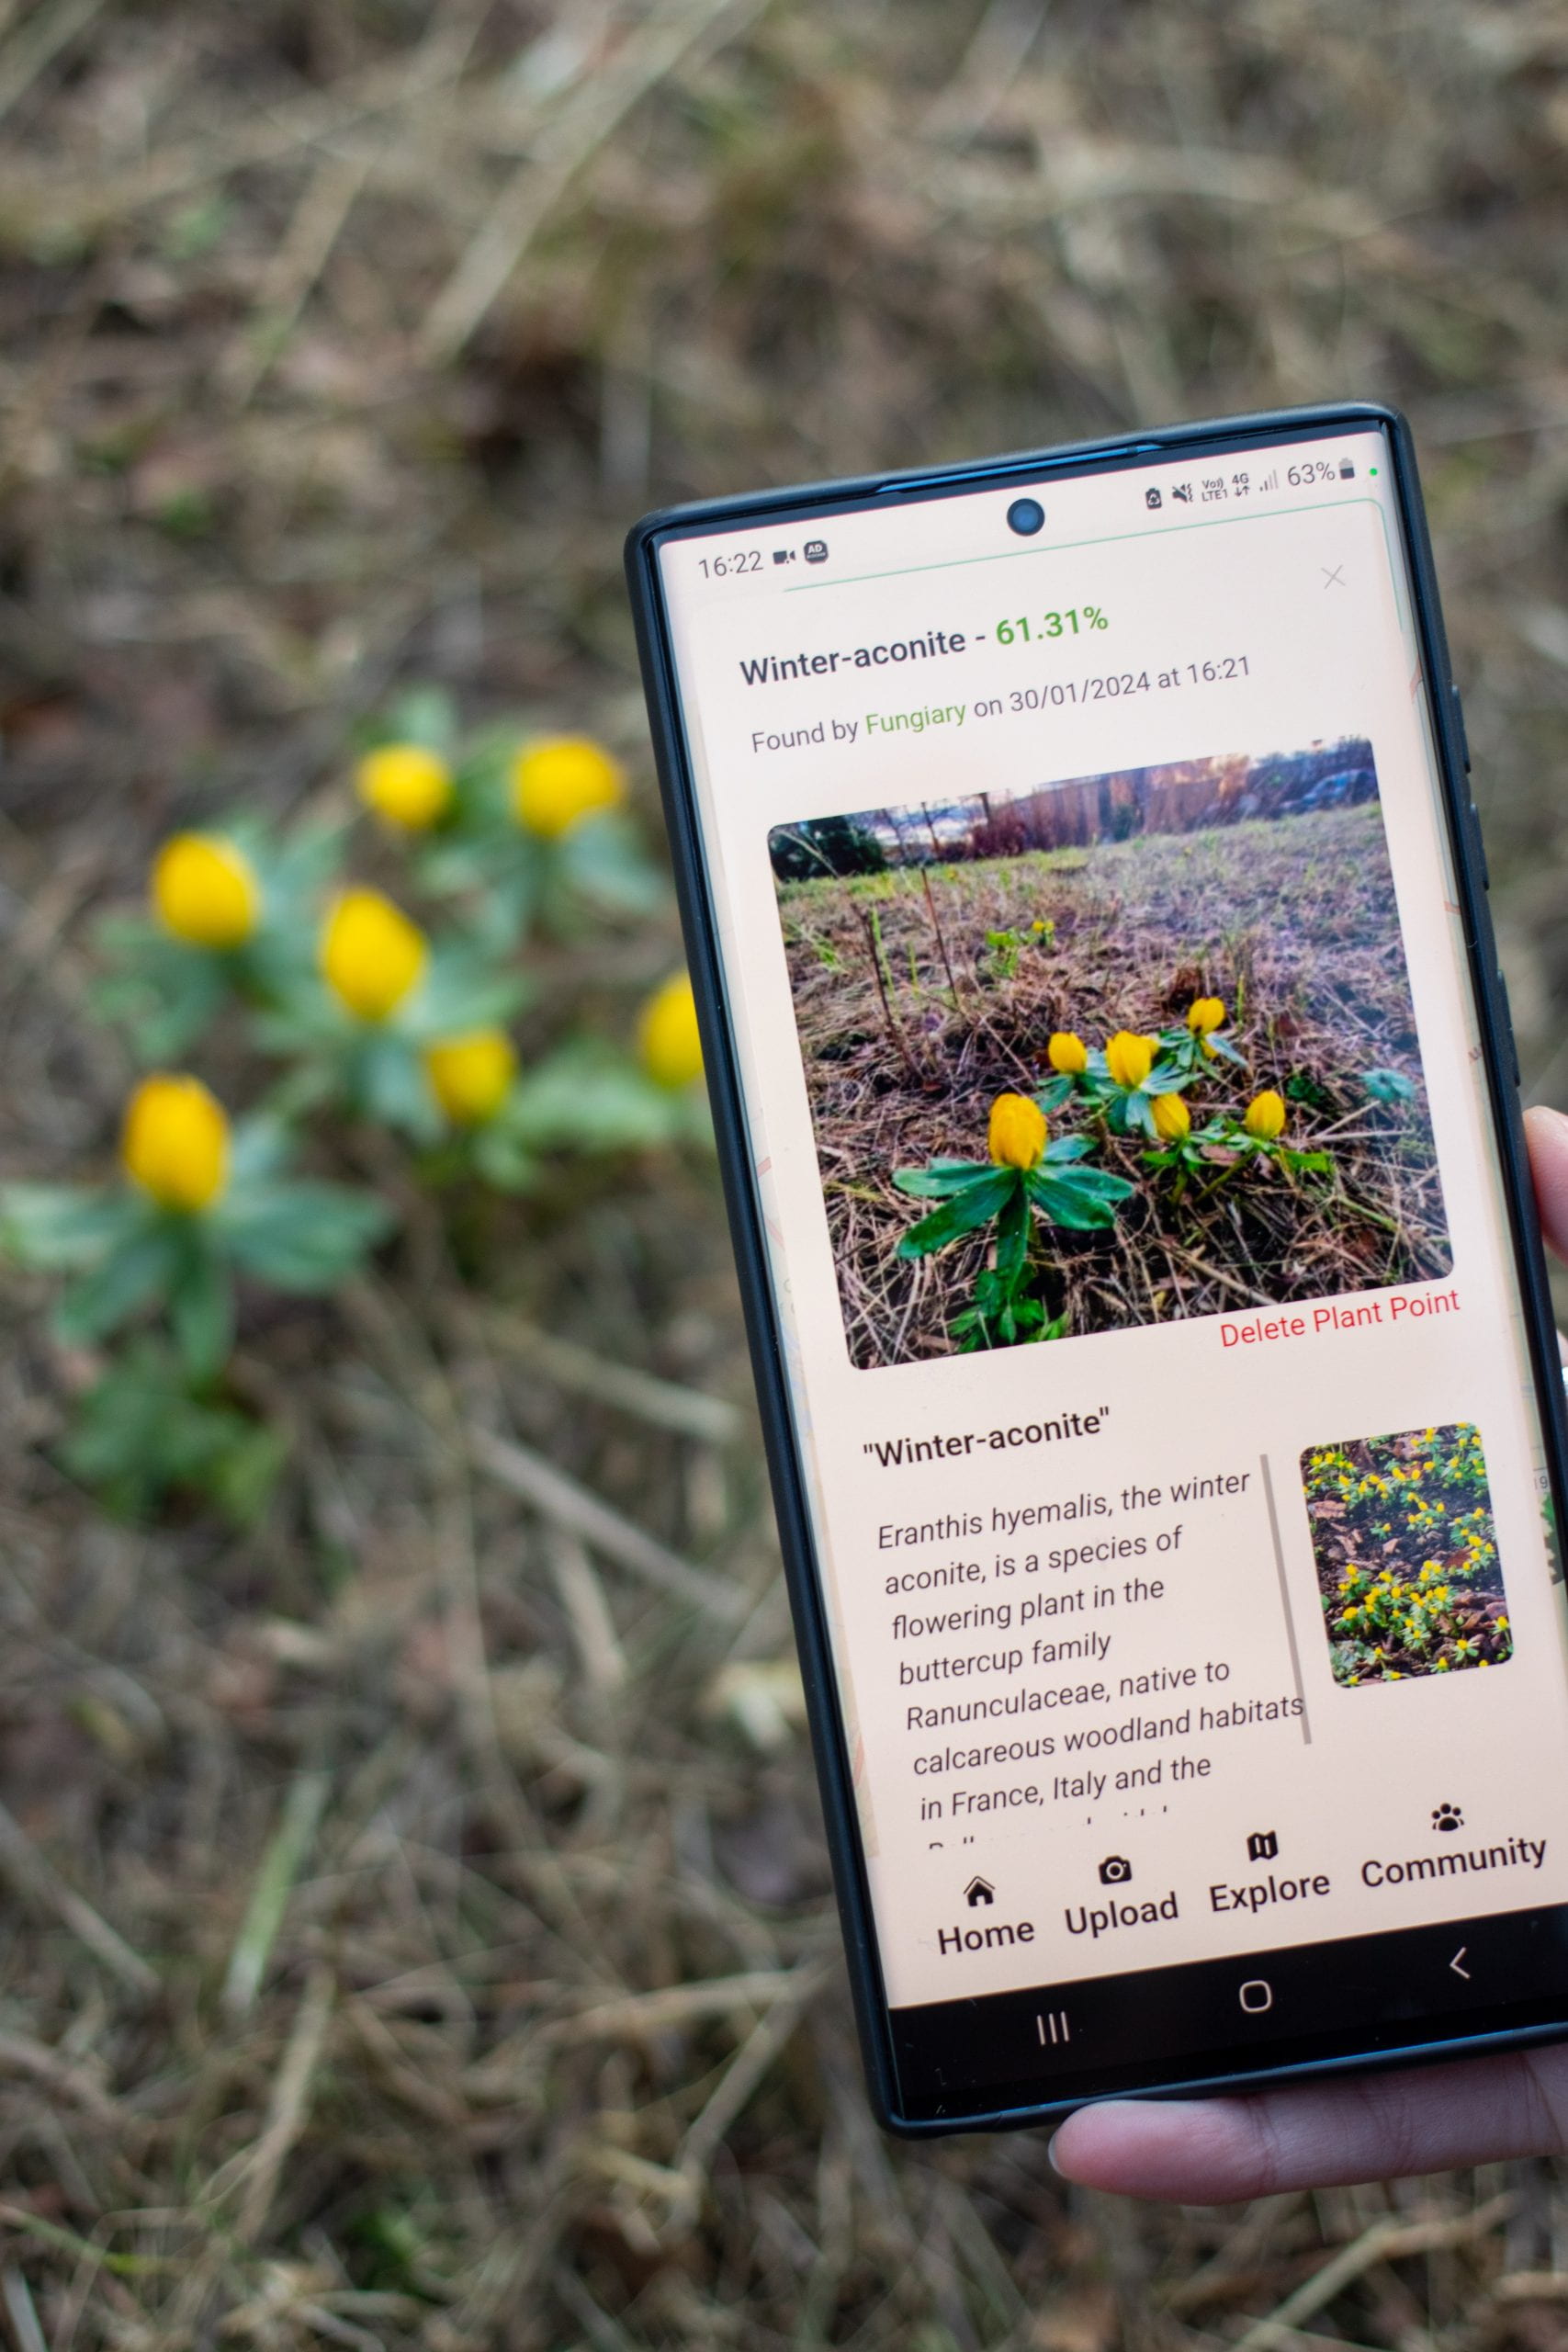 A phone screen shows an image id of small yellow flowers on a plant with text describing it as winter aconite.